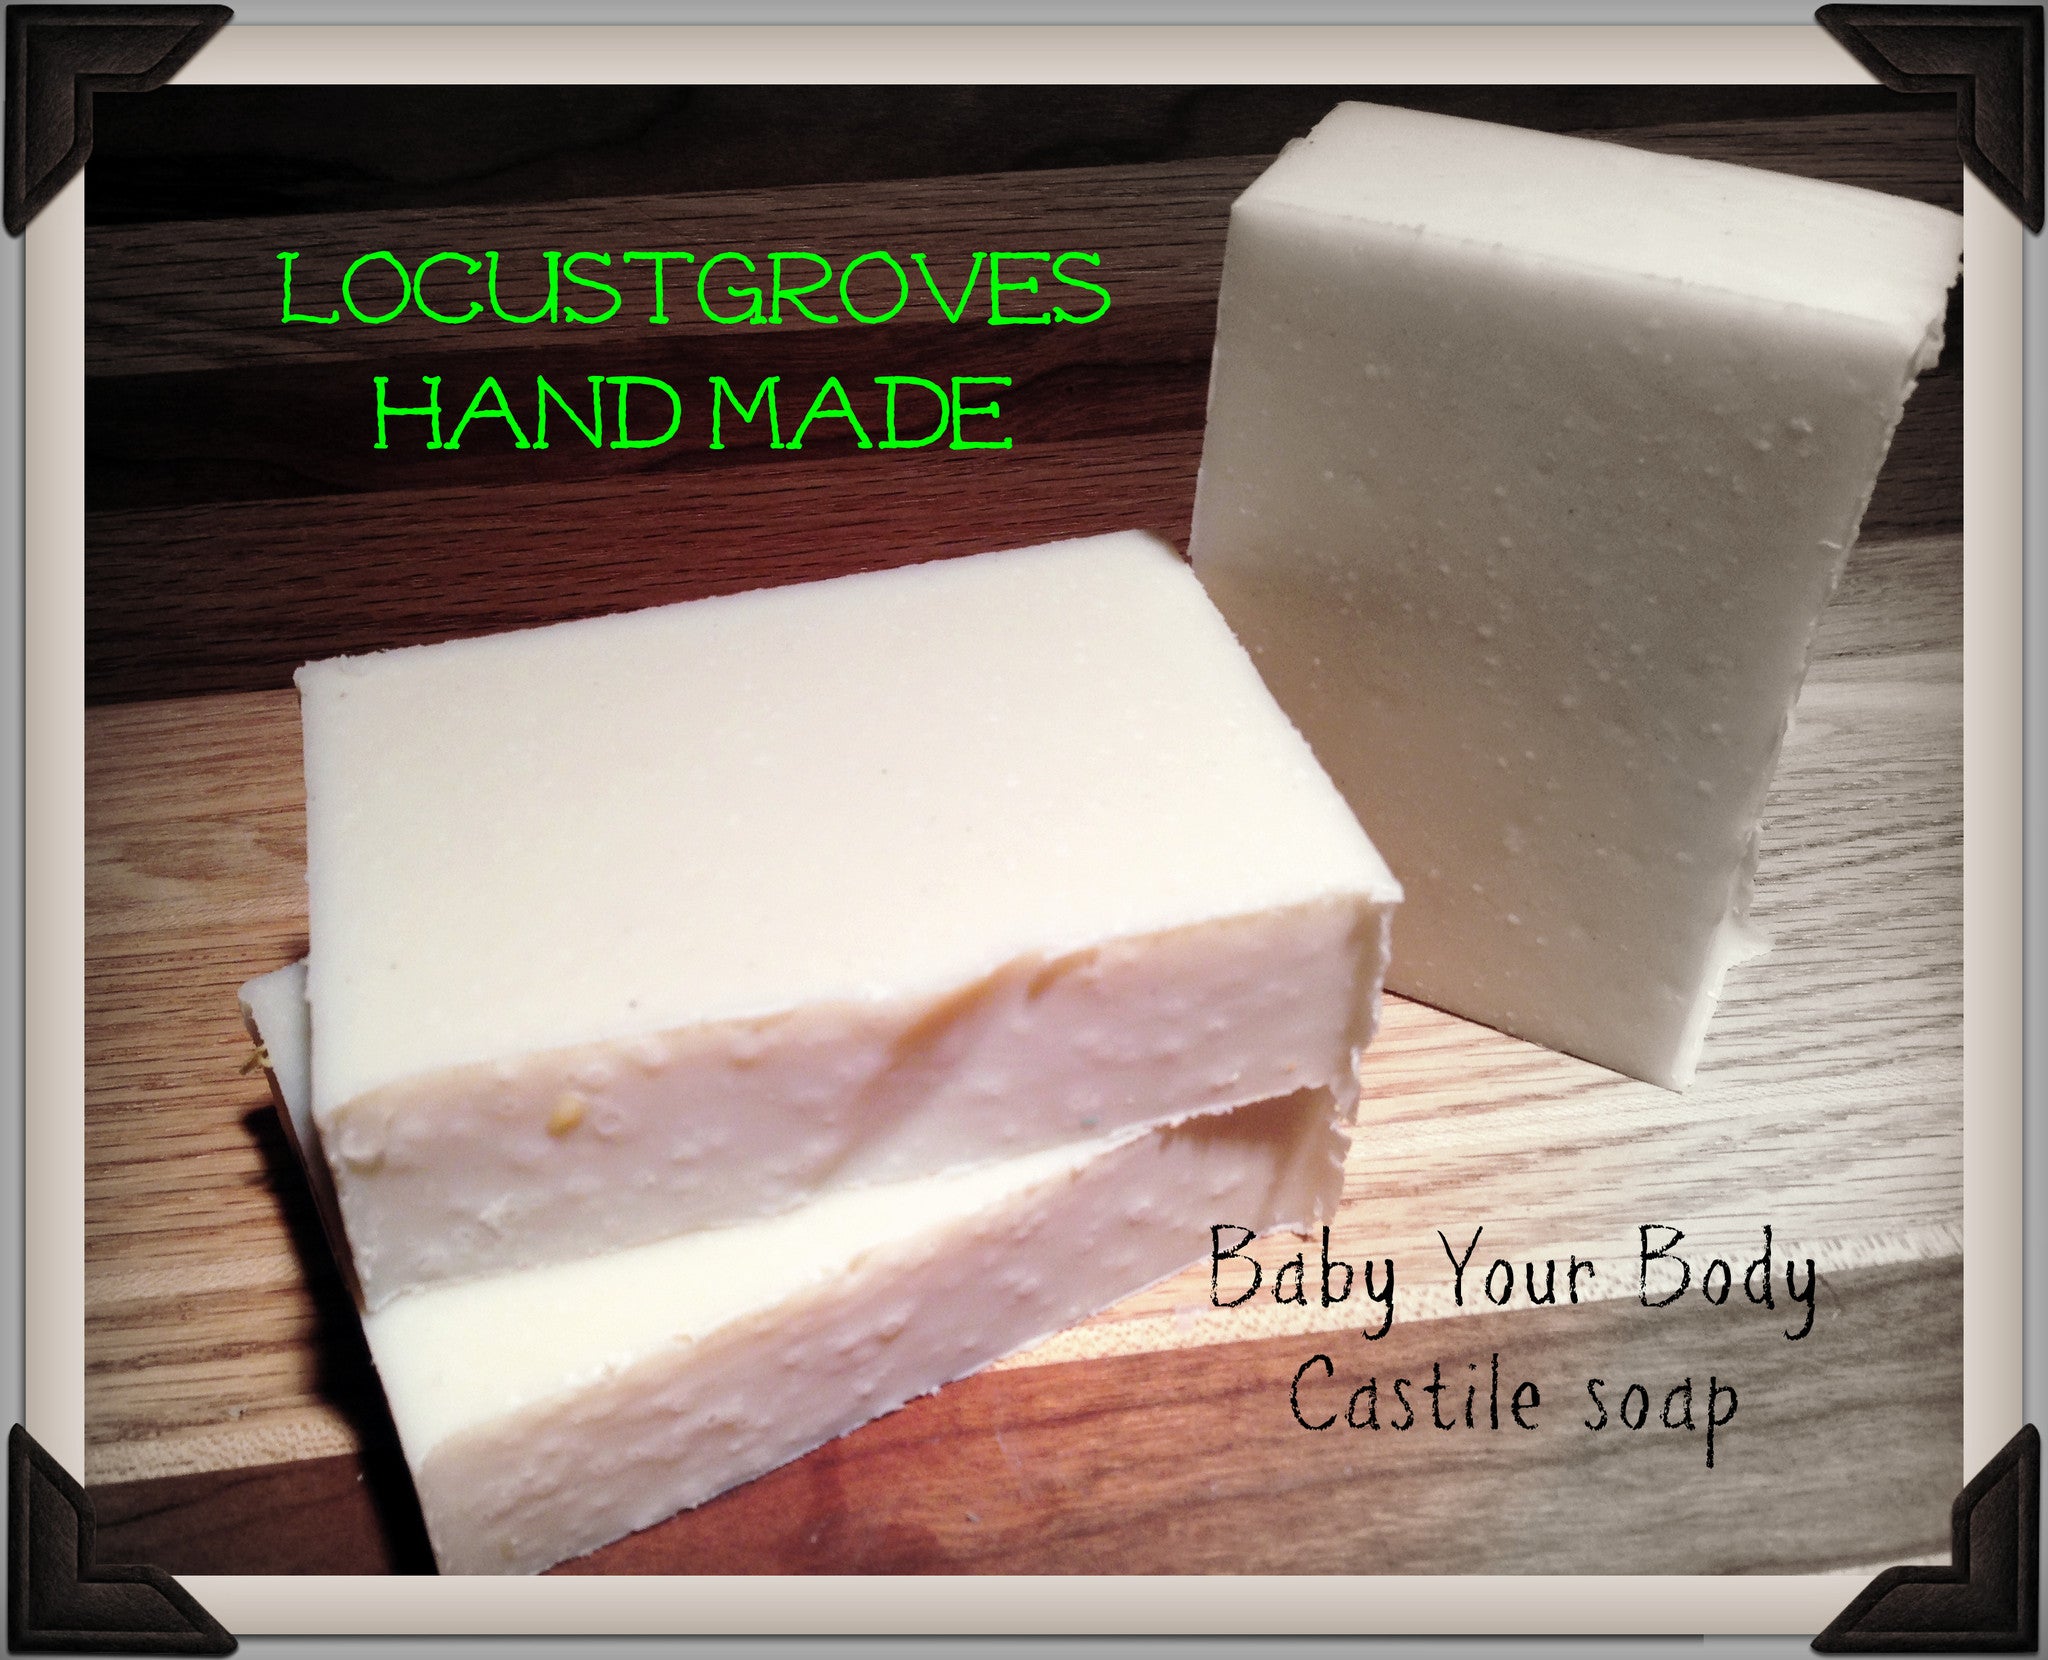 Baby Your Body (Castile soap)